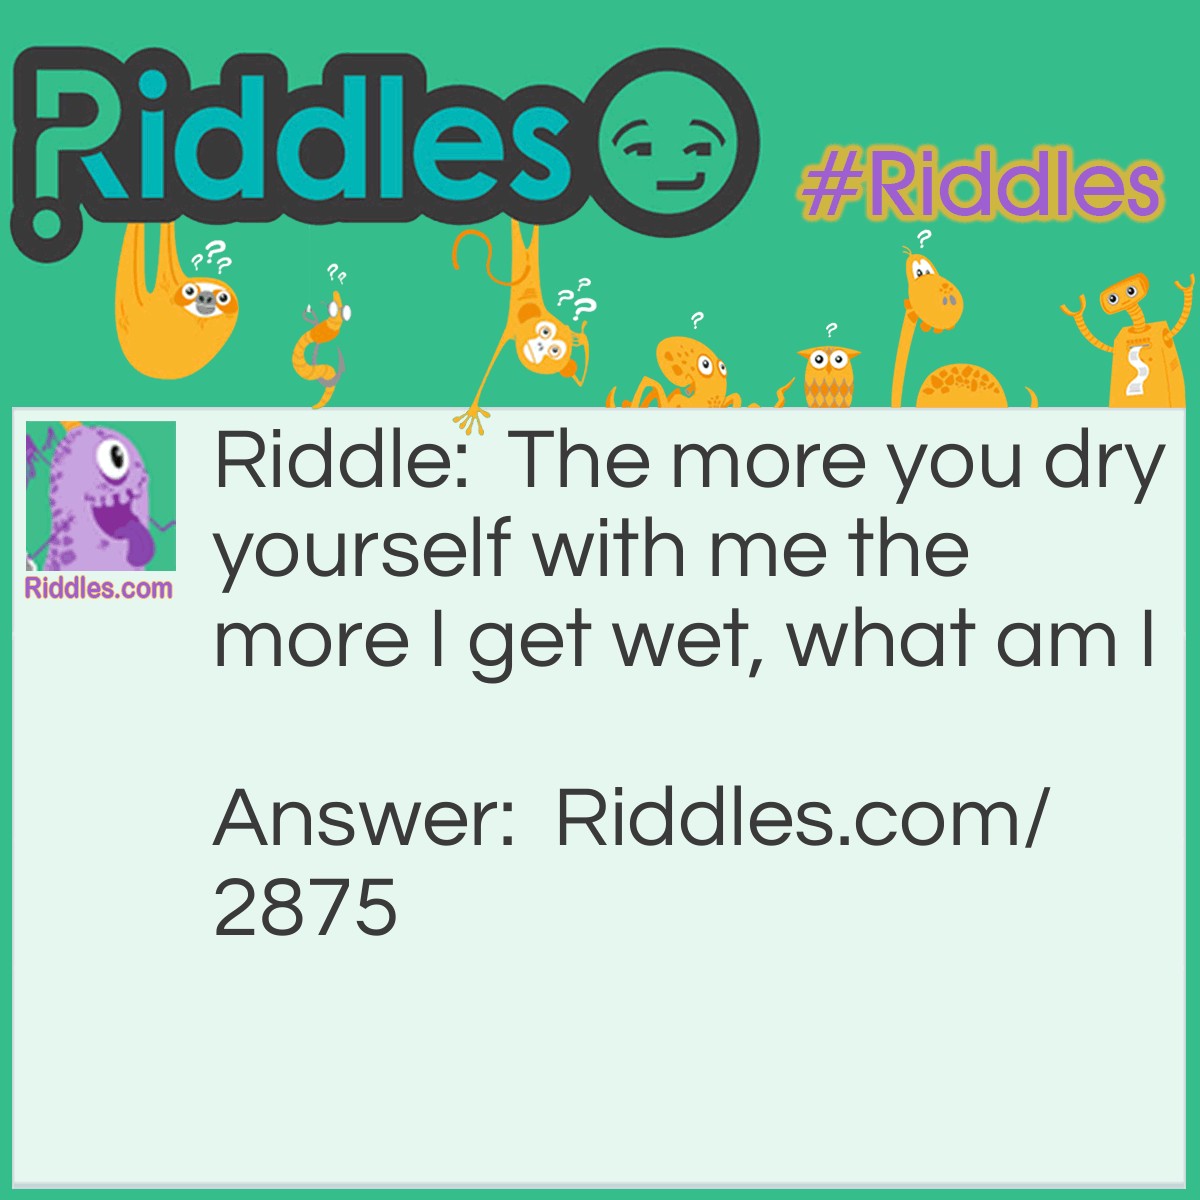 Riddle: The more you dry yourself with me the more I get wet. What am I? Answer: A towel.